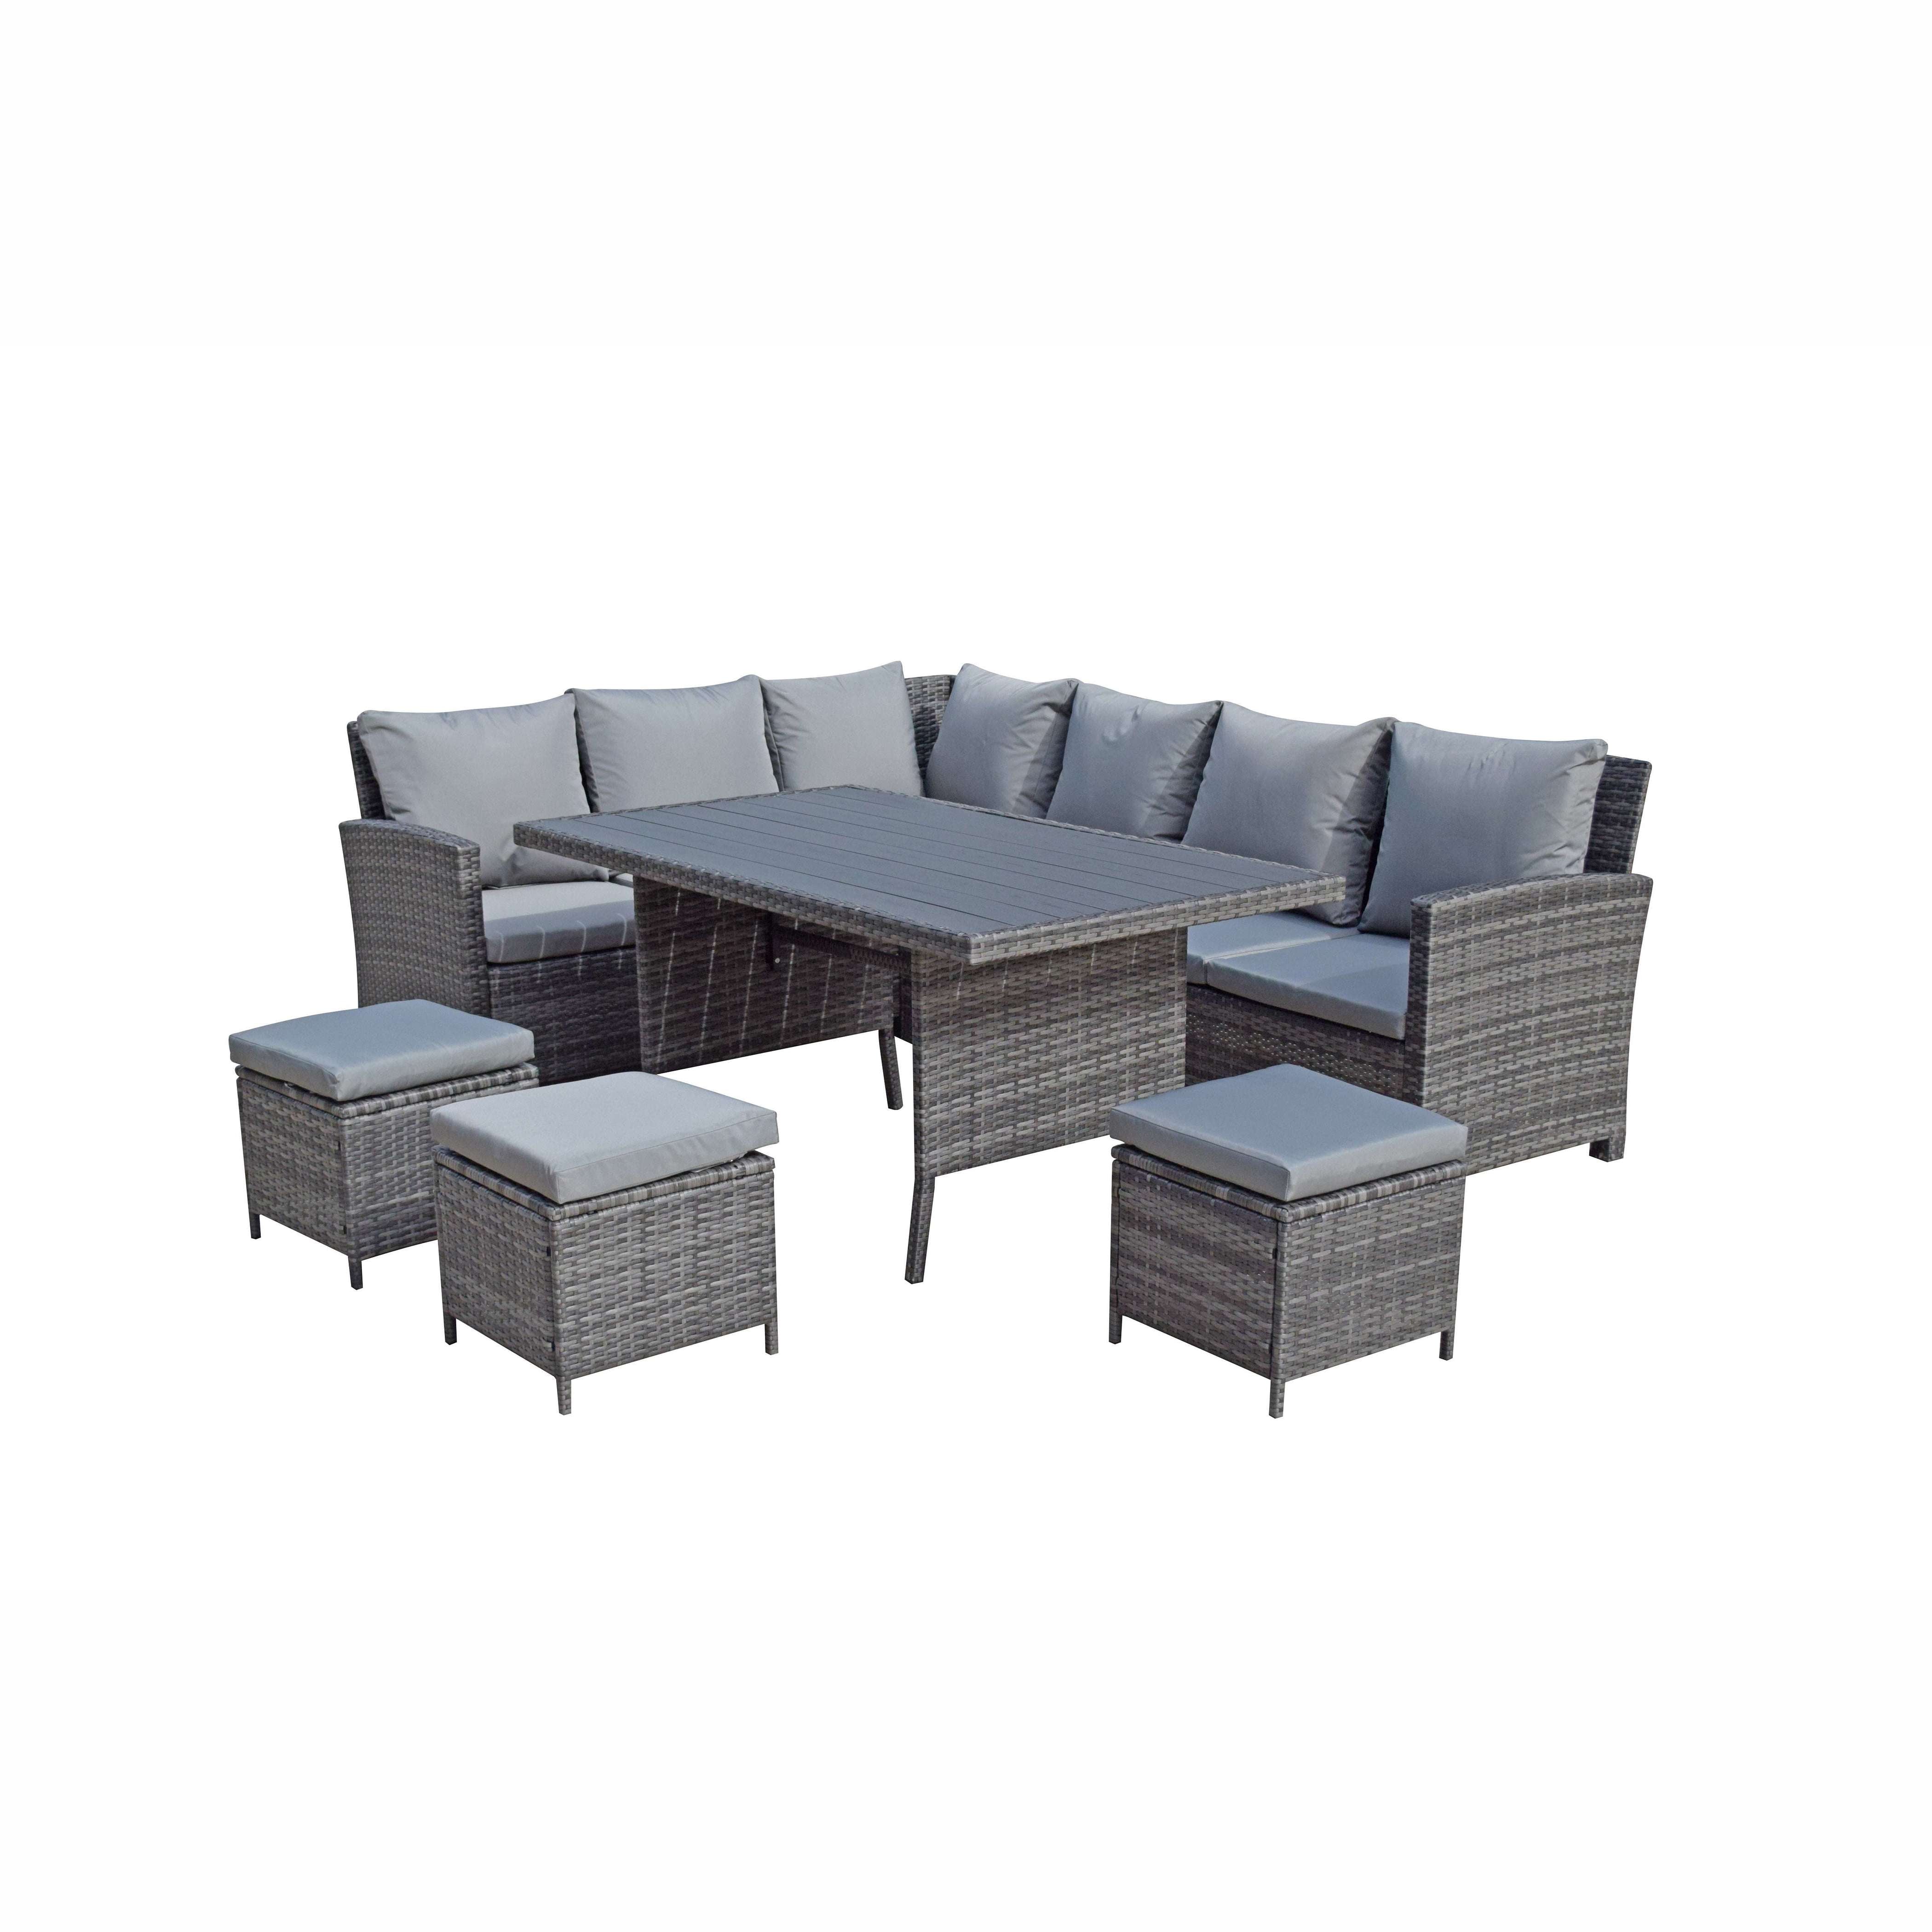 Exceptional Garden:Signature Weave Charlie Polywood Corner Dining Set